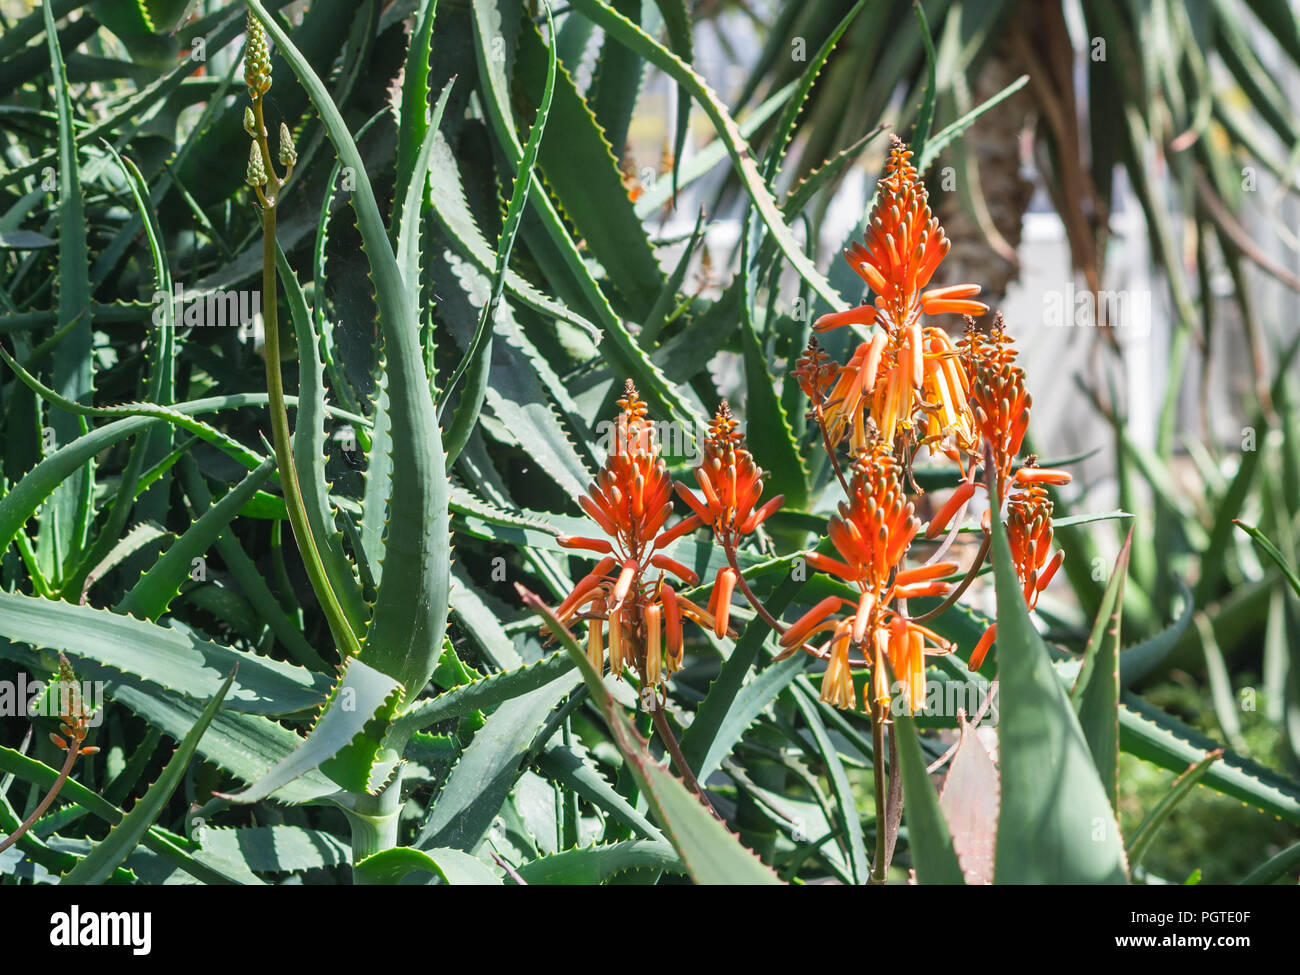 aloe elgonica bushes in the garden in full bloom, orange-red flowers on long stems, dense large green foliage, the plant is lit by sunlight, a summer Stock Photo